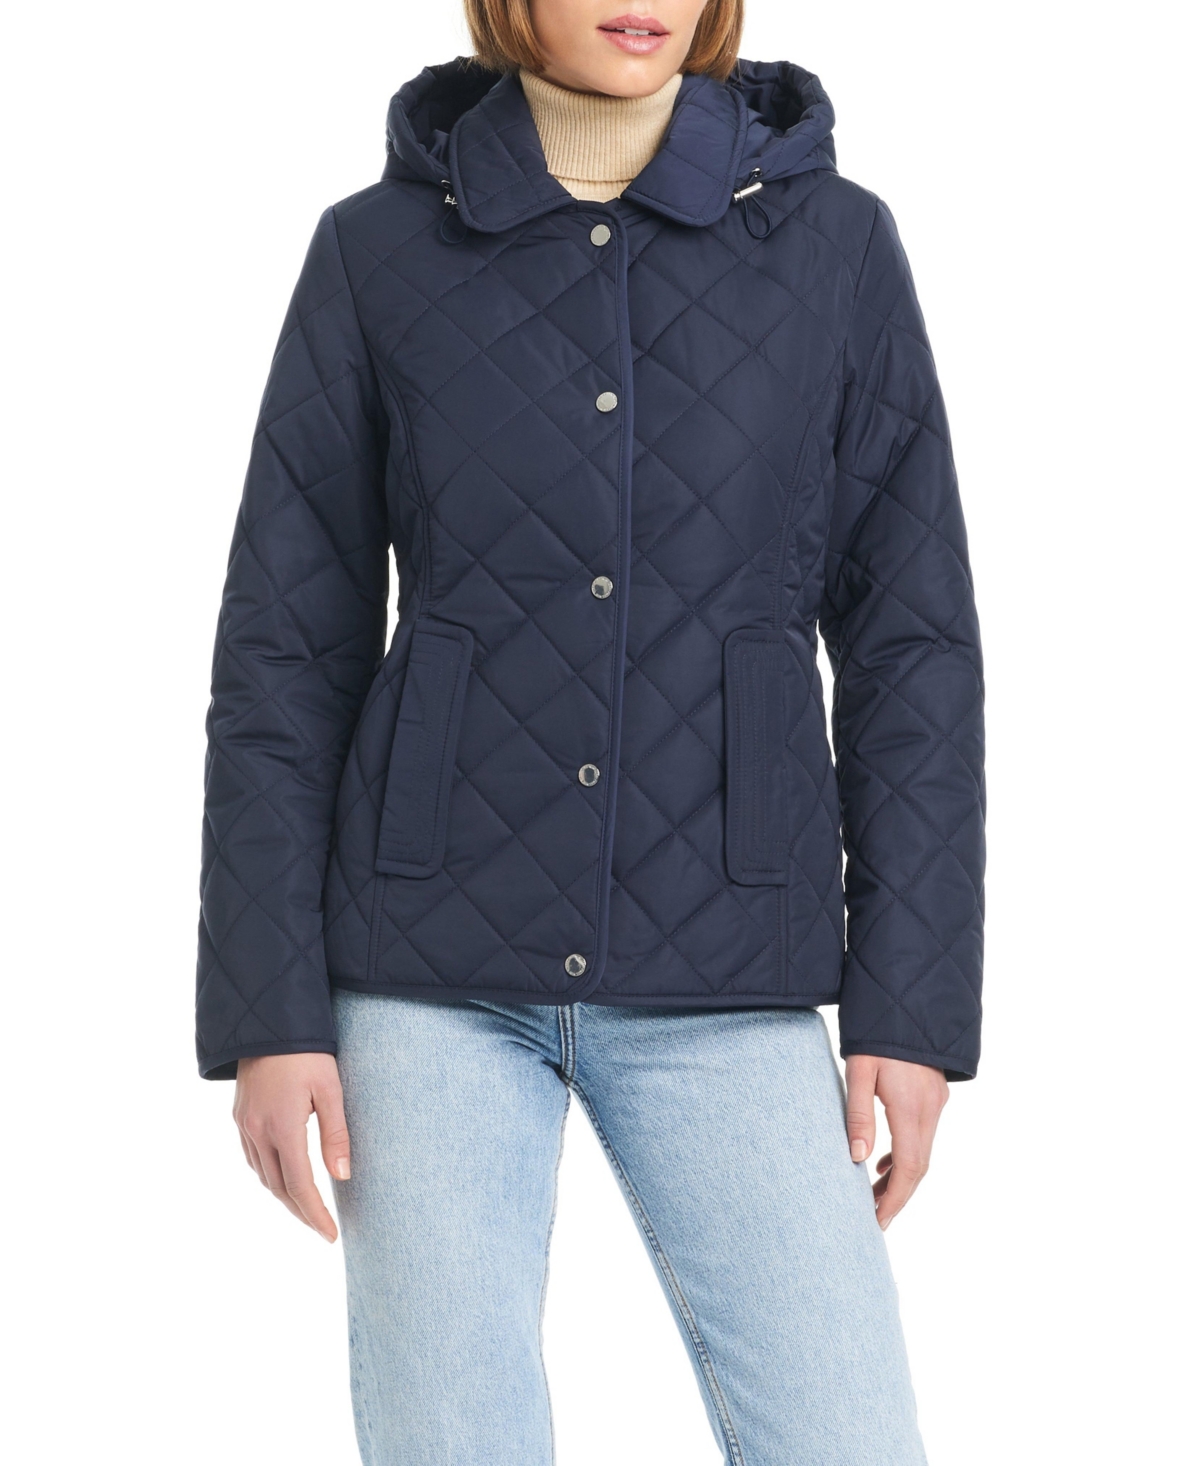 Women's Hooded Quilted Water-Resistant Jacket - Bone